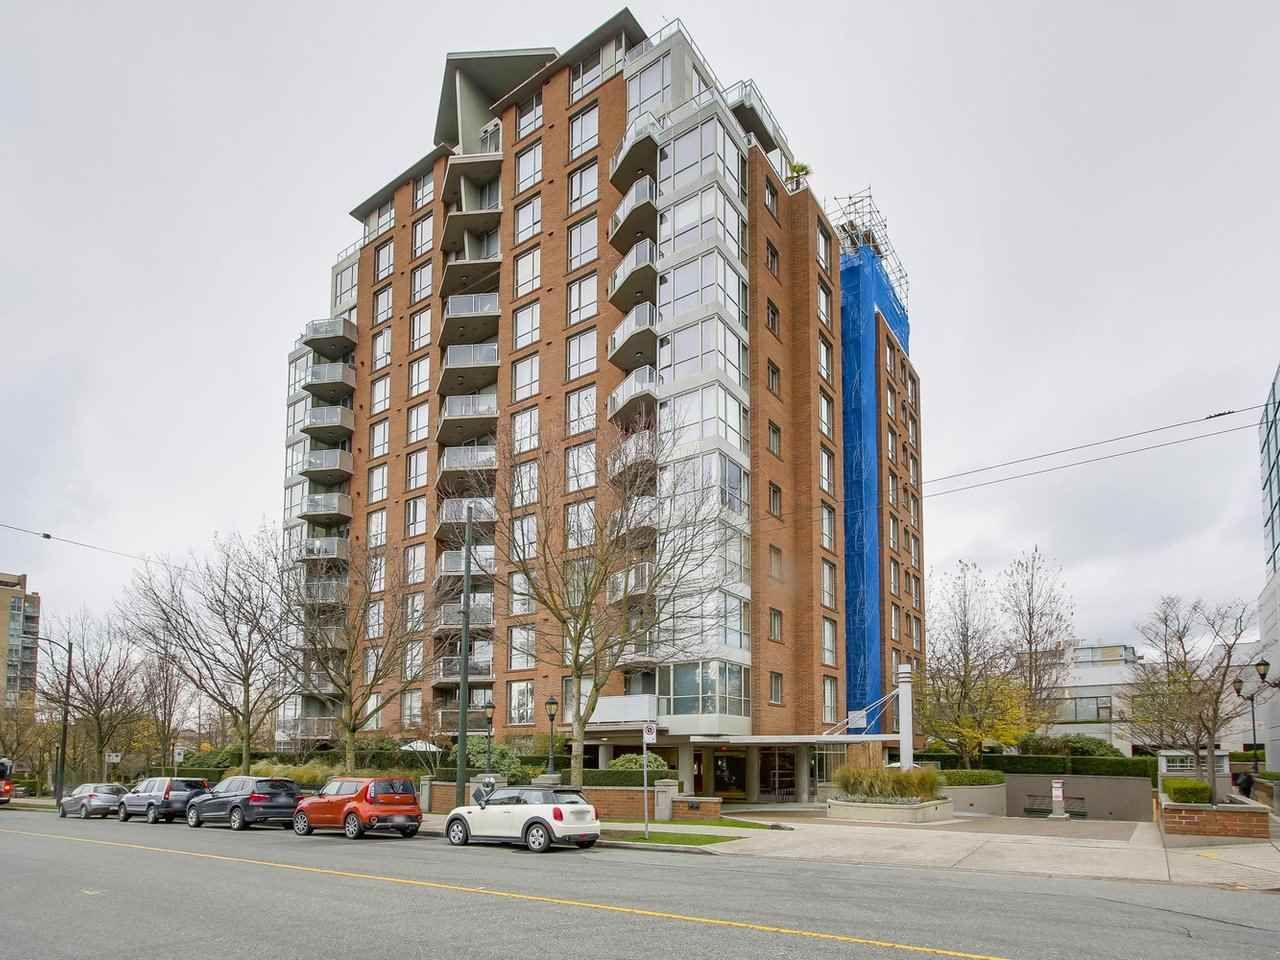 Main Photo: 408 1575 W 10TH AVENUE in Vancouver: Fairview VW Condo for sale (Vancouver West)  : MLS®# R2221749